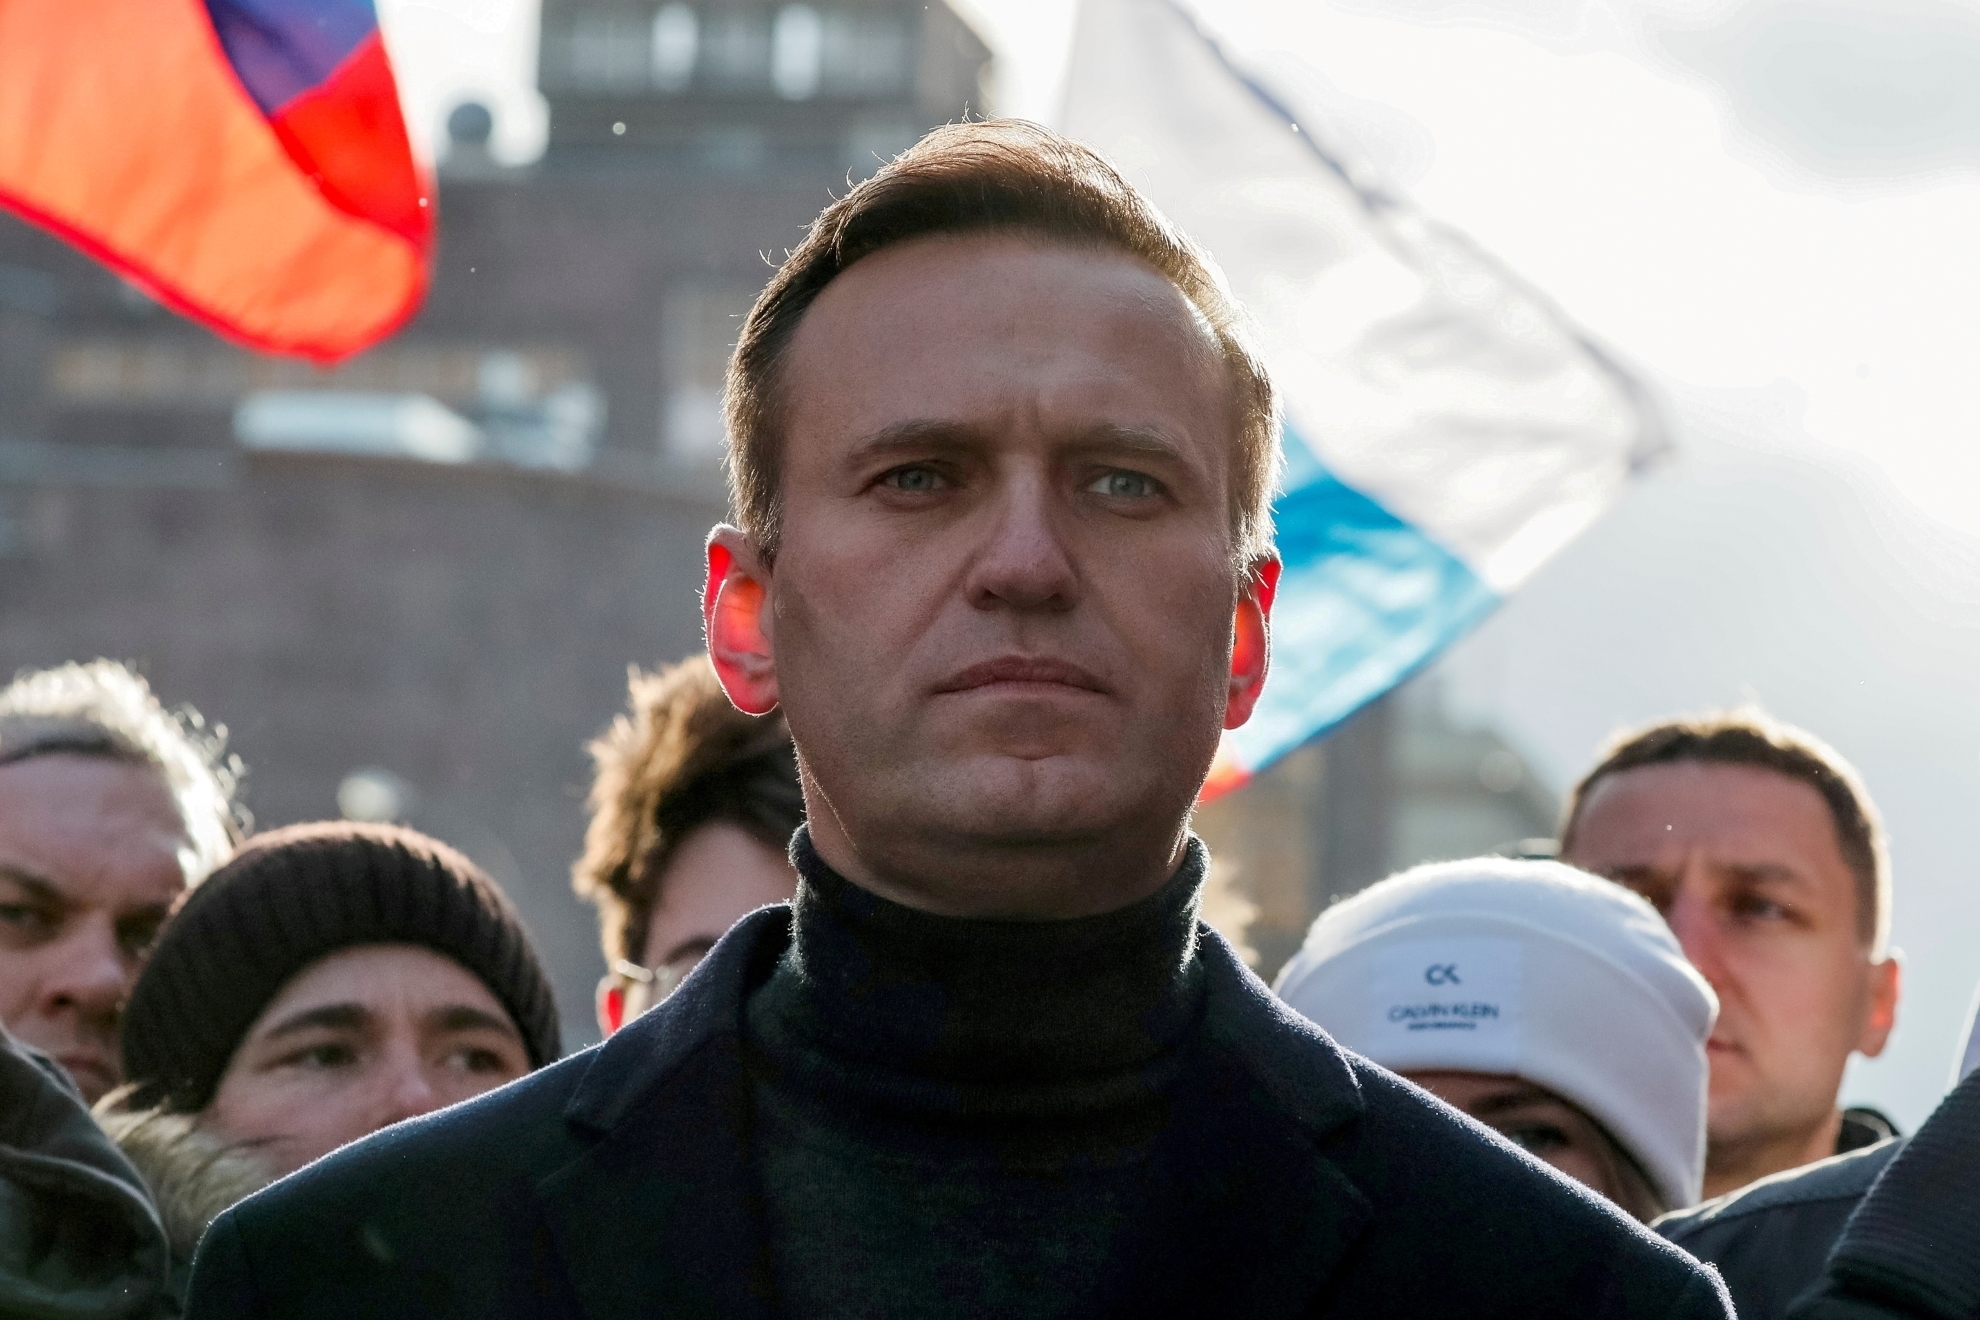 Alexei Navalny cause of death: what we know so far about why he died at 47 in prison